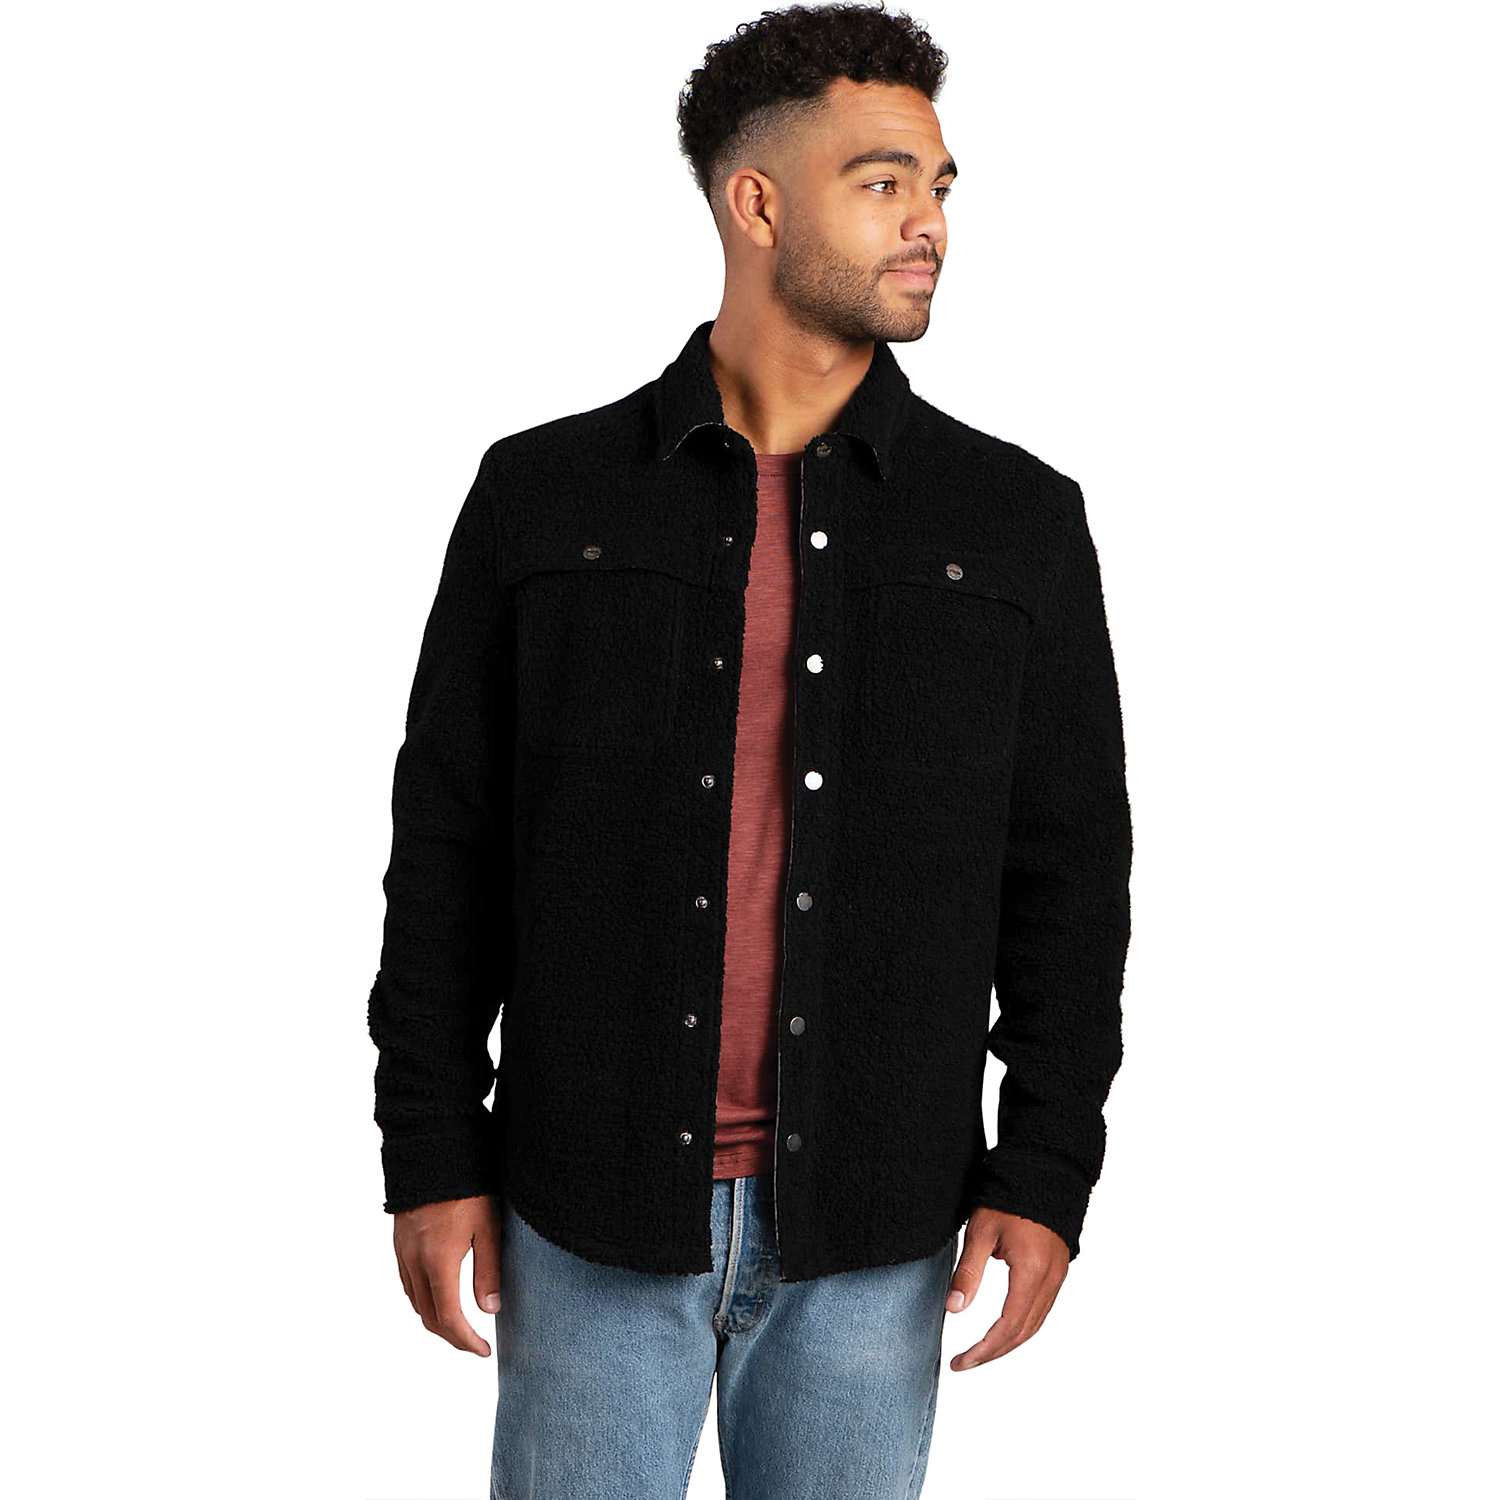 Toad & Co Mens Telluride Sherpa Shirtjac